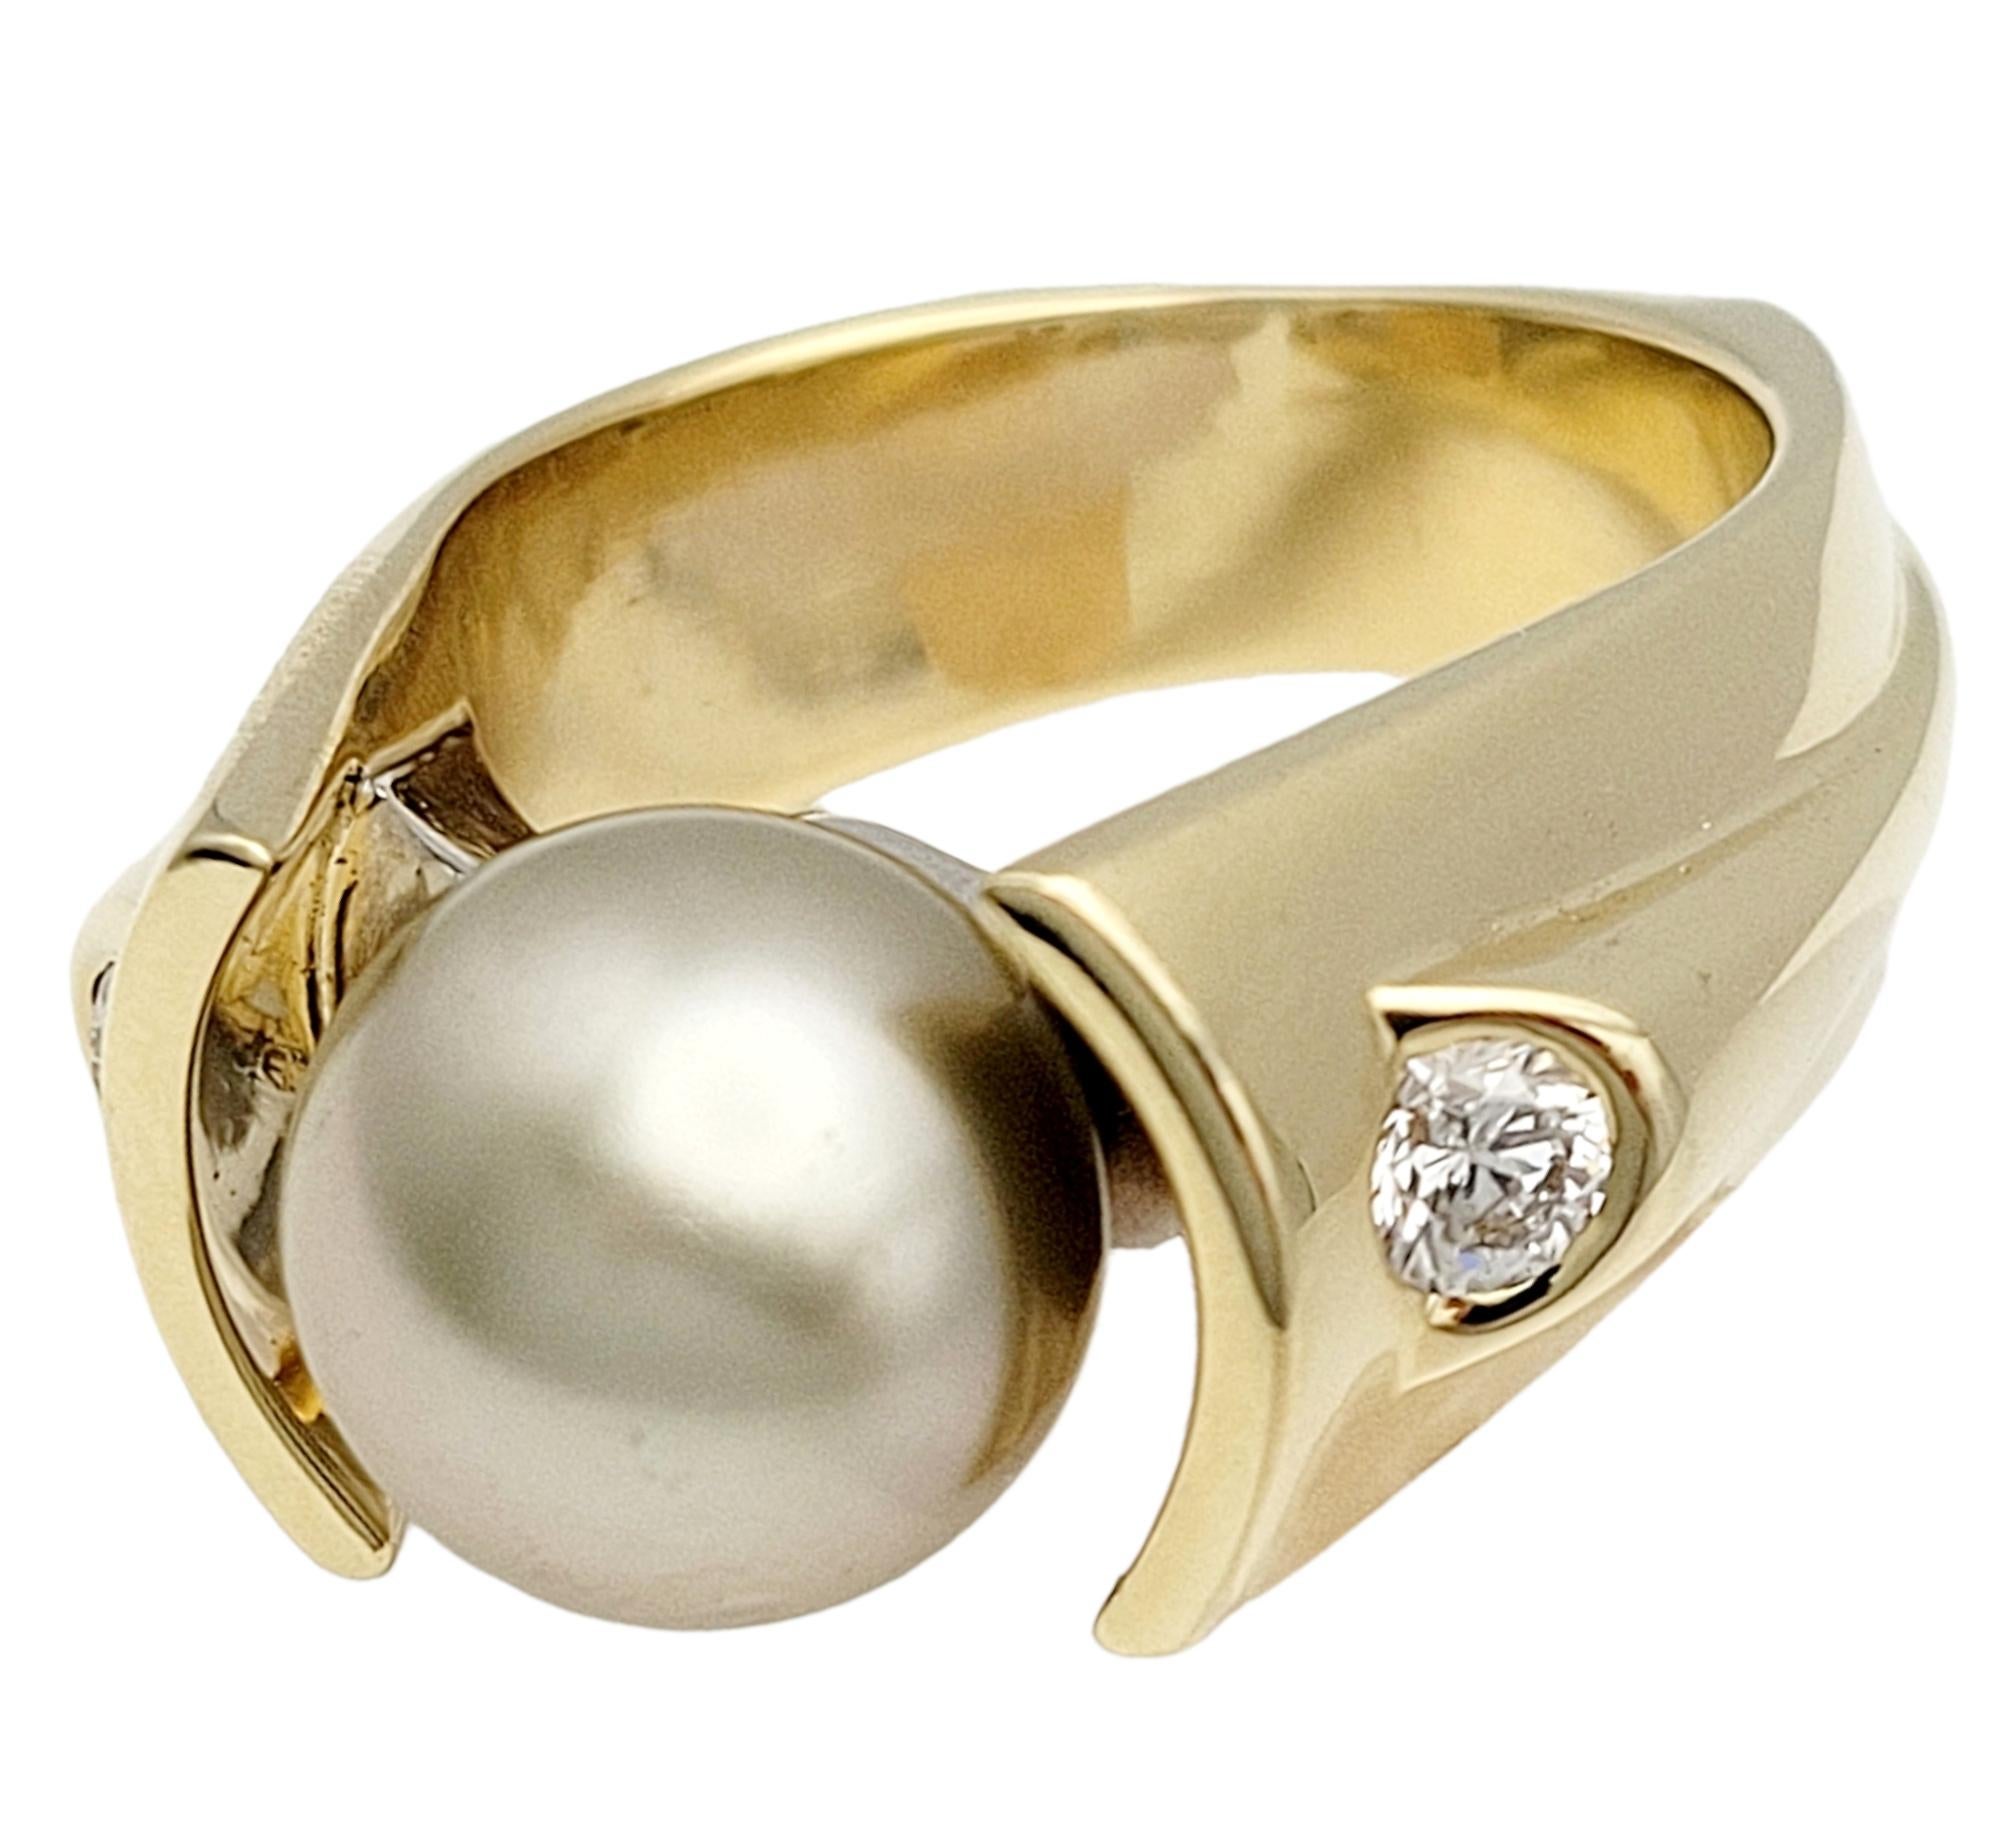 Ring size: 10

Introducing a stunning Cultured Tahitian Pearl & Diamond cocktail ring, a true embodiment of elegance and sophistication. Crafted in 14-karat yellow & white gold, this exquisite piece weighs 22.79 grams, ensuring a substantial and